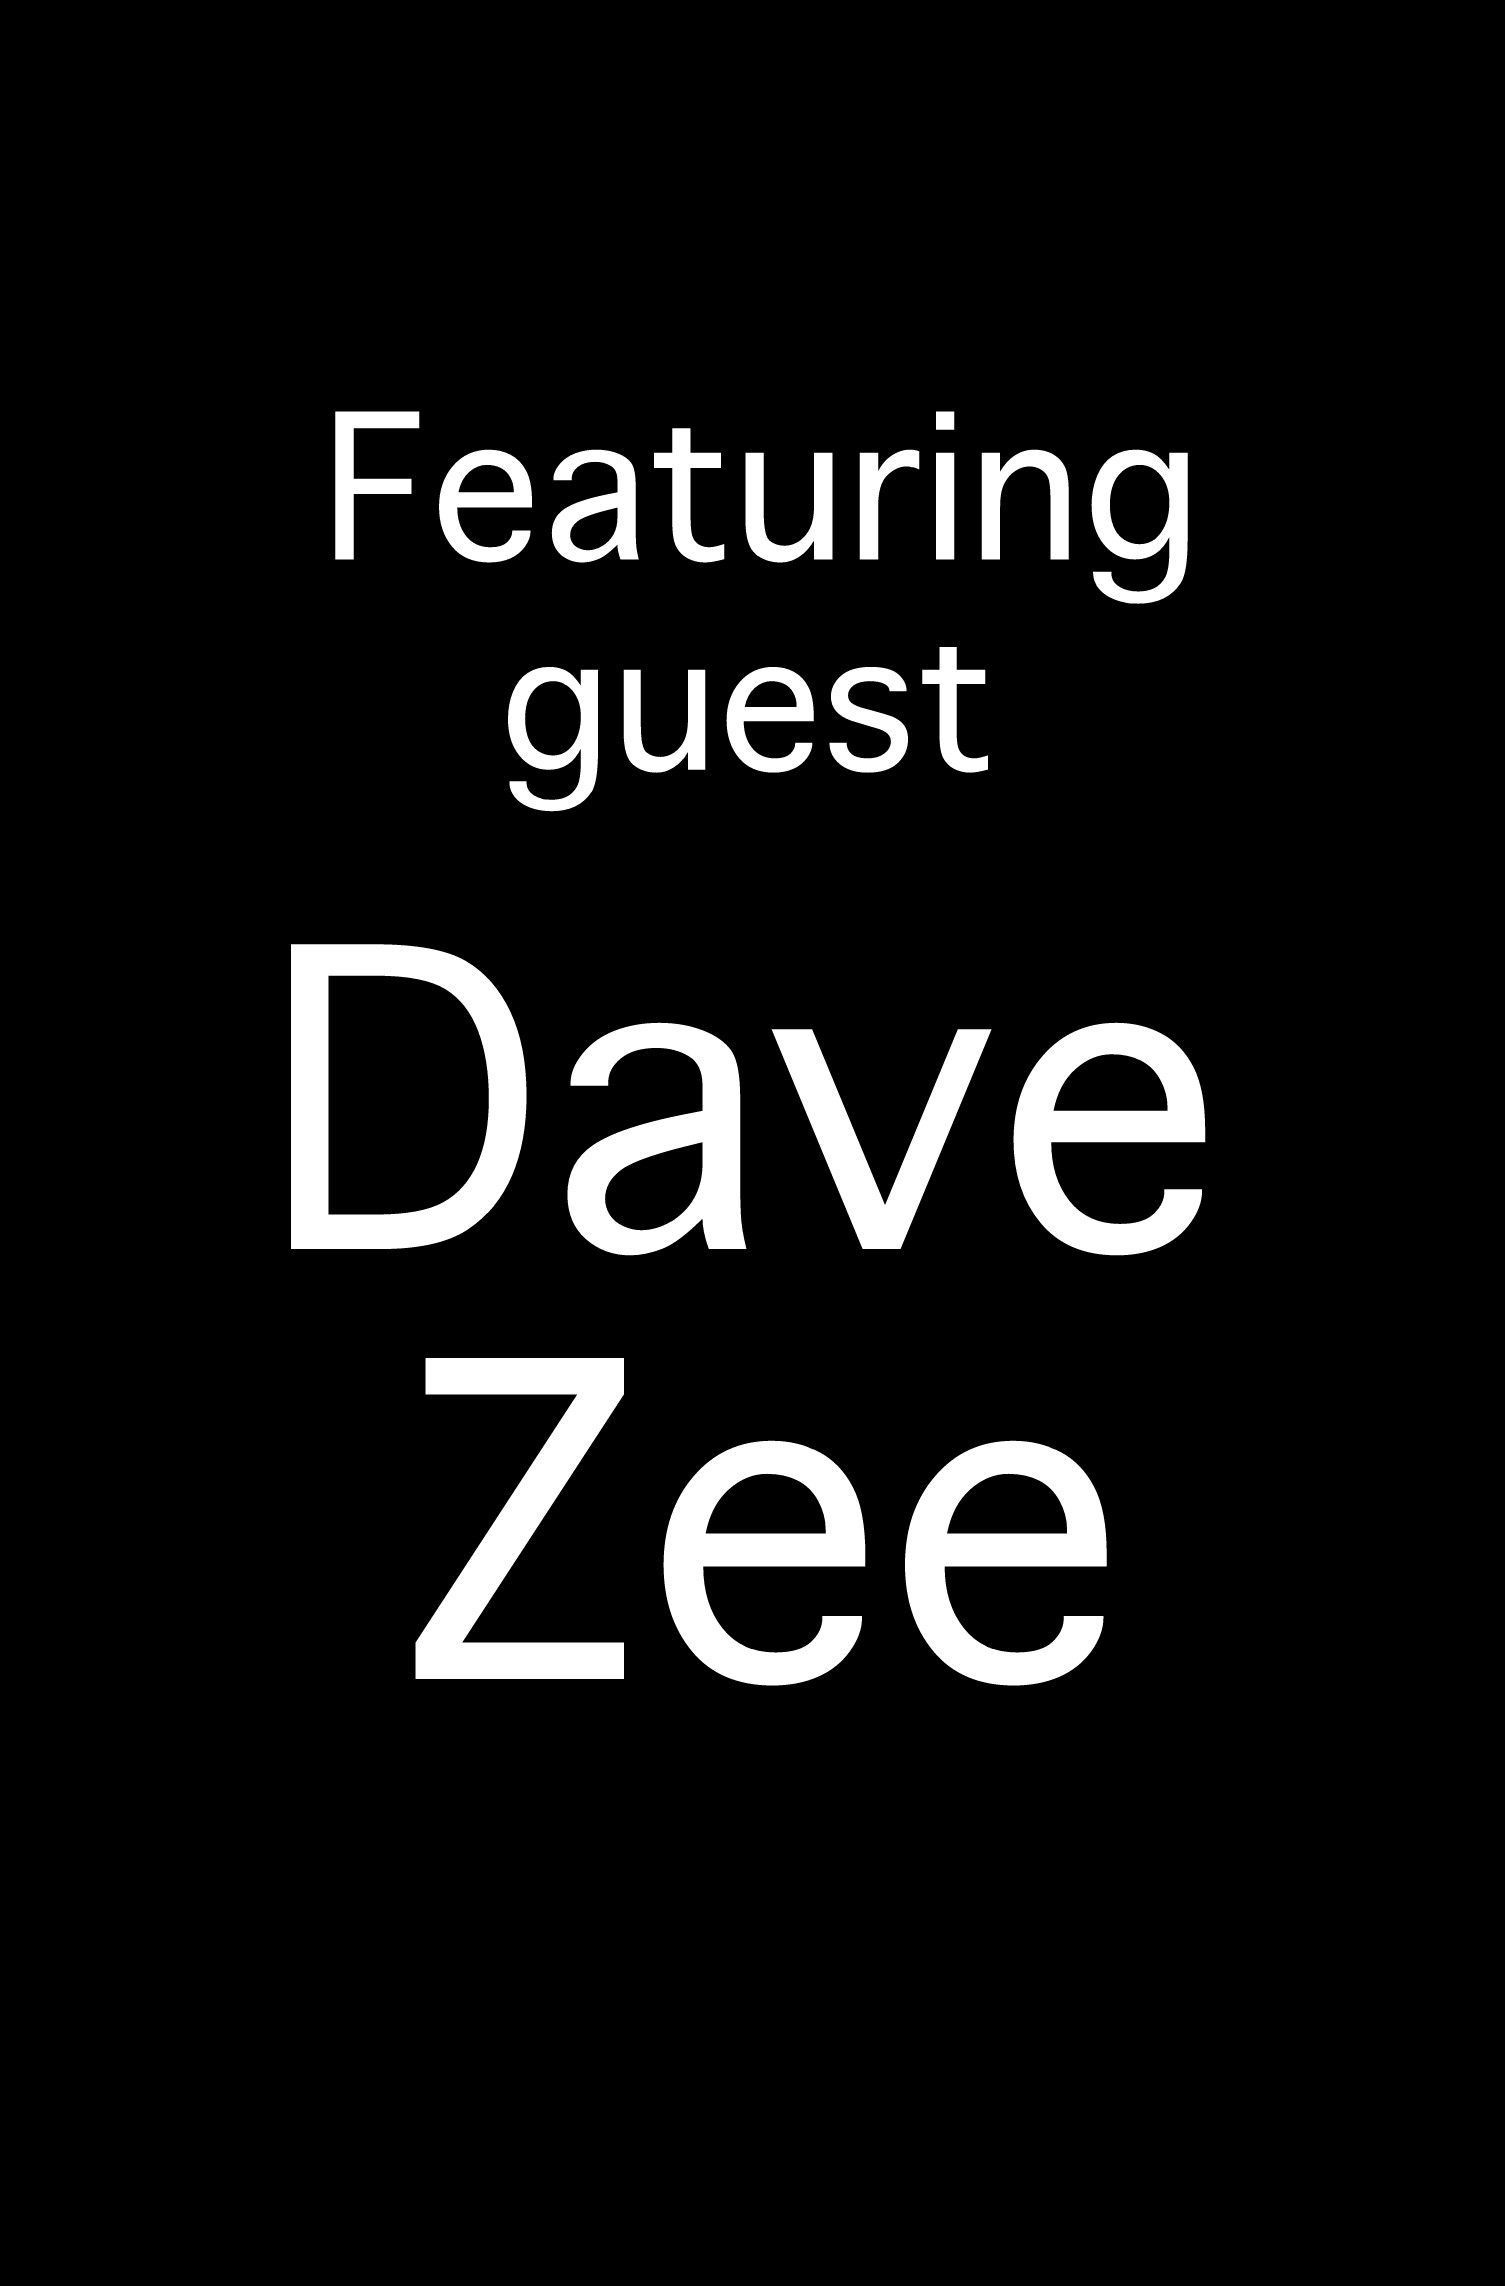 Featuring guest Dave Zee